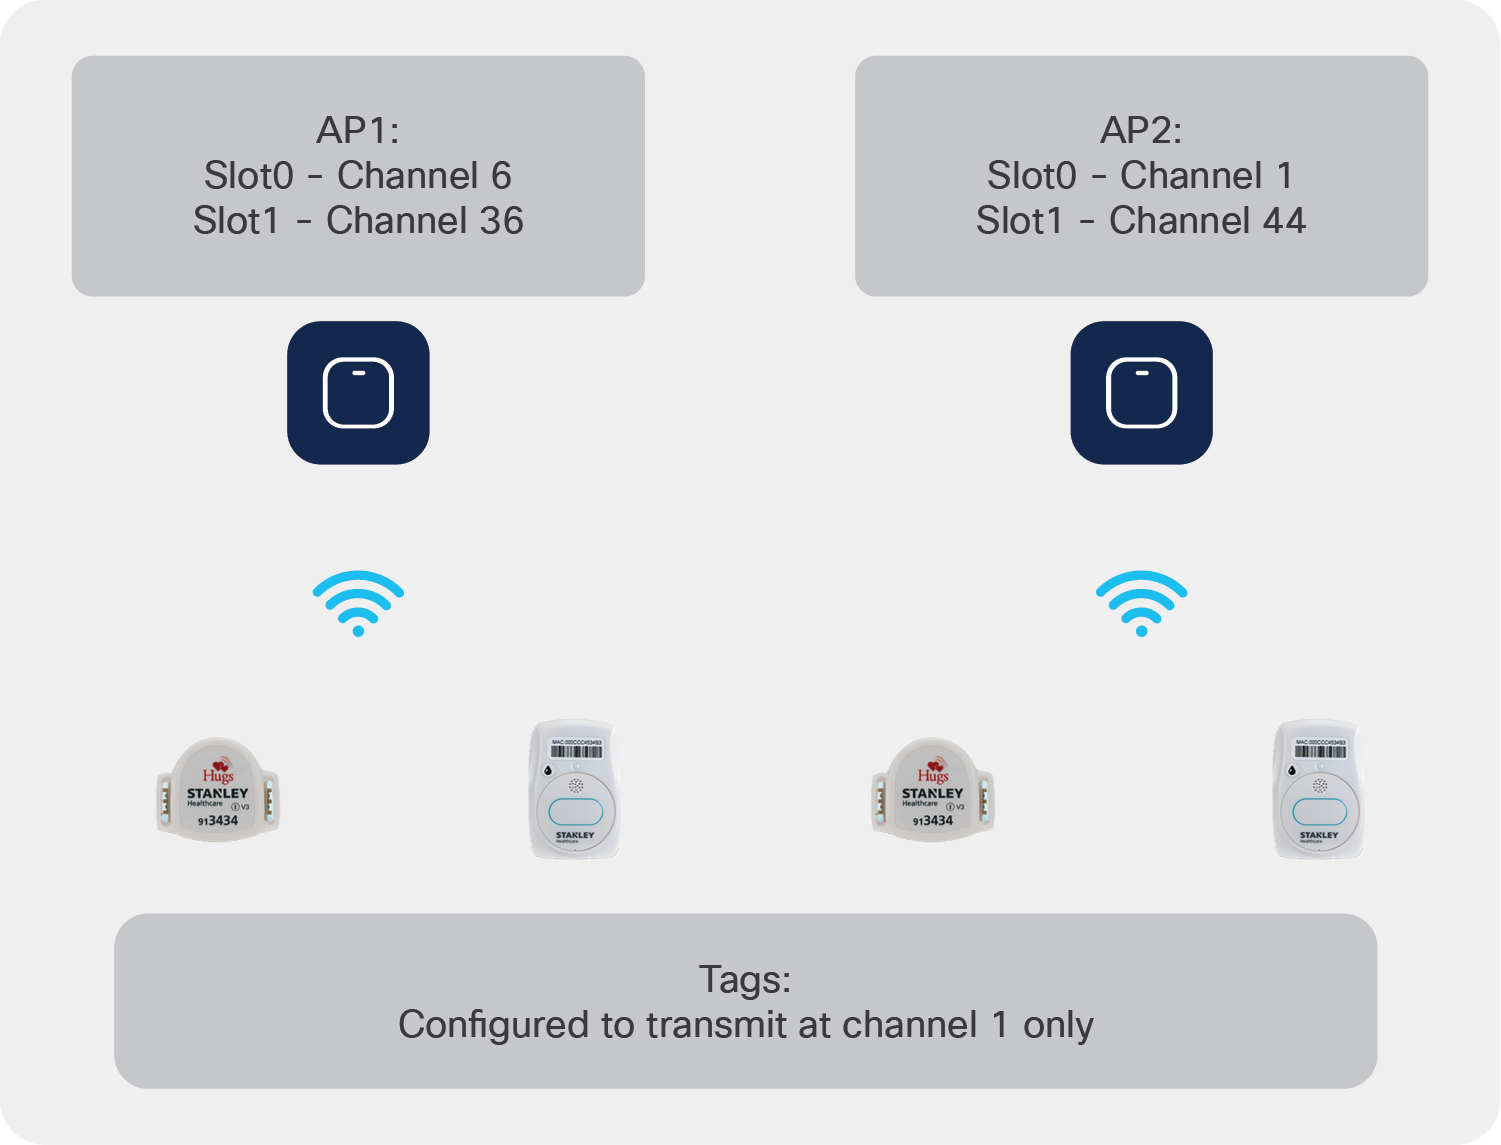 Tags transmitted on channel 1 are more likely to be head by AP2